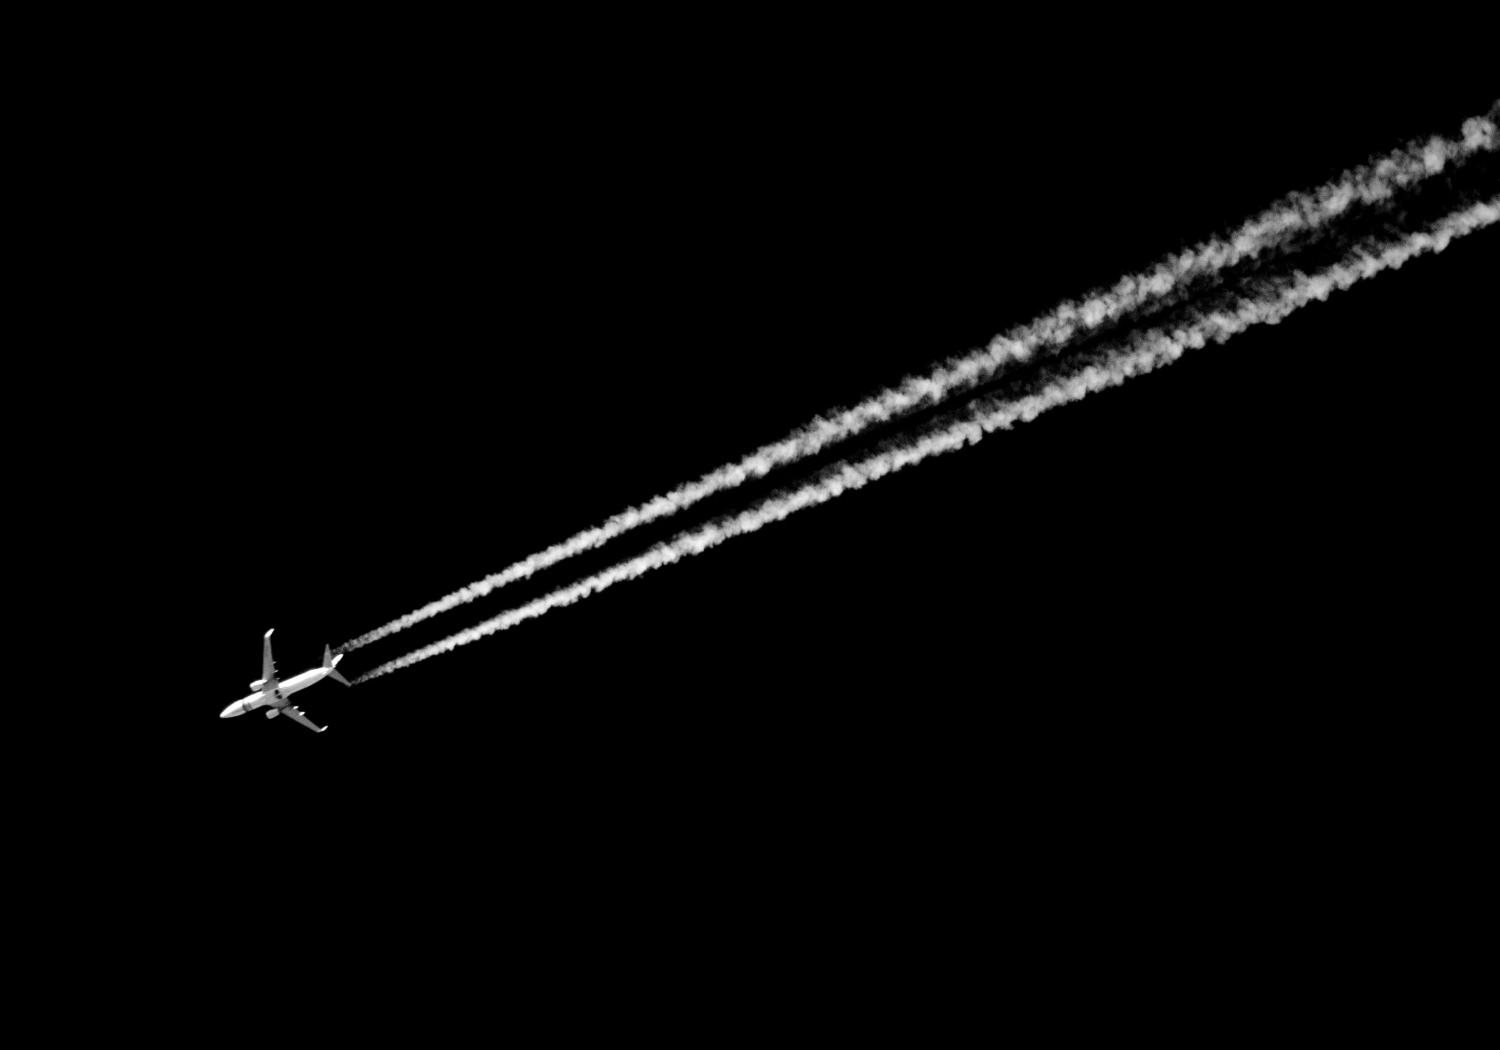 An aircraft shooting across a dark sky and leaving behind white trails.